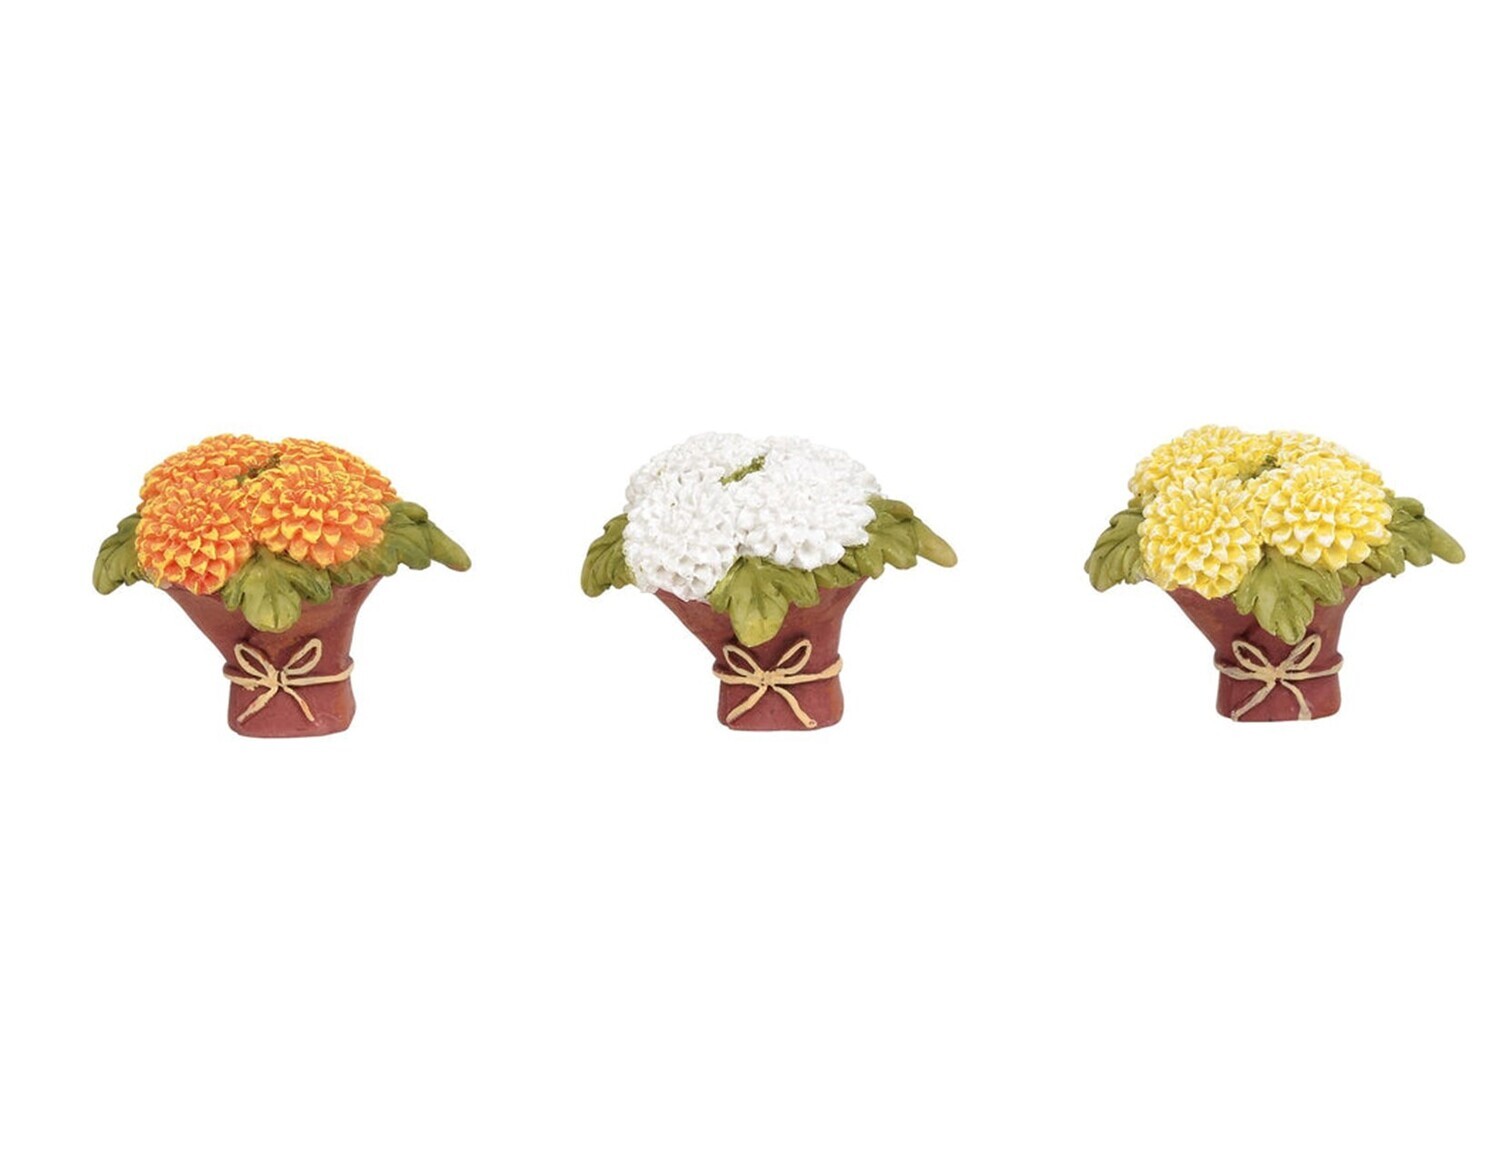 Department 56 "Mums for Mom Set of 3" Fall Village Accessory (6003199)